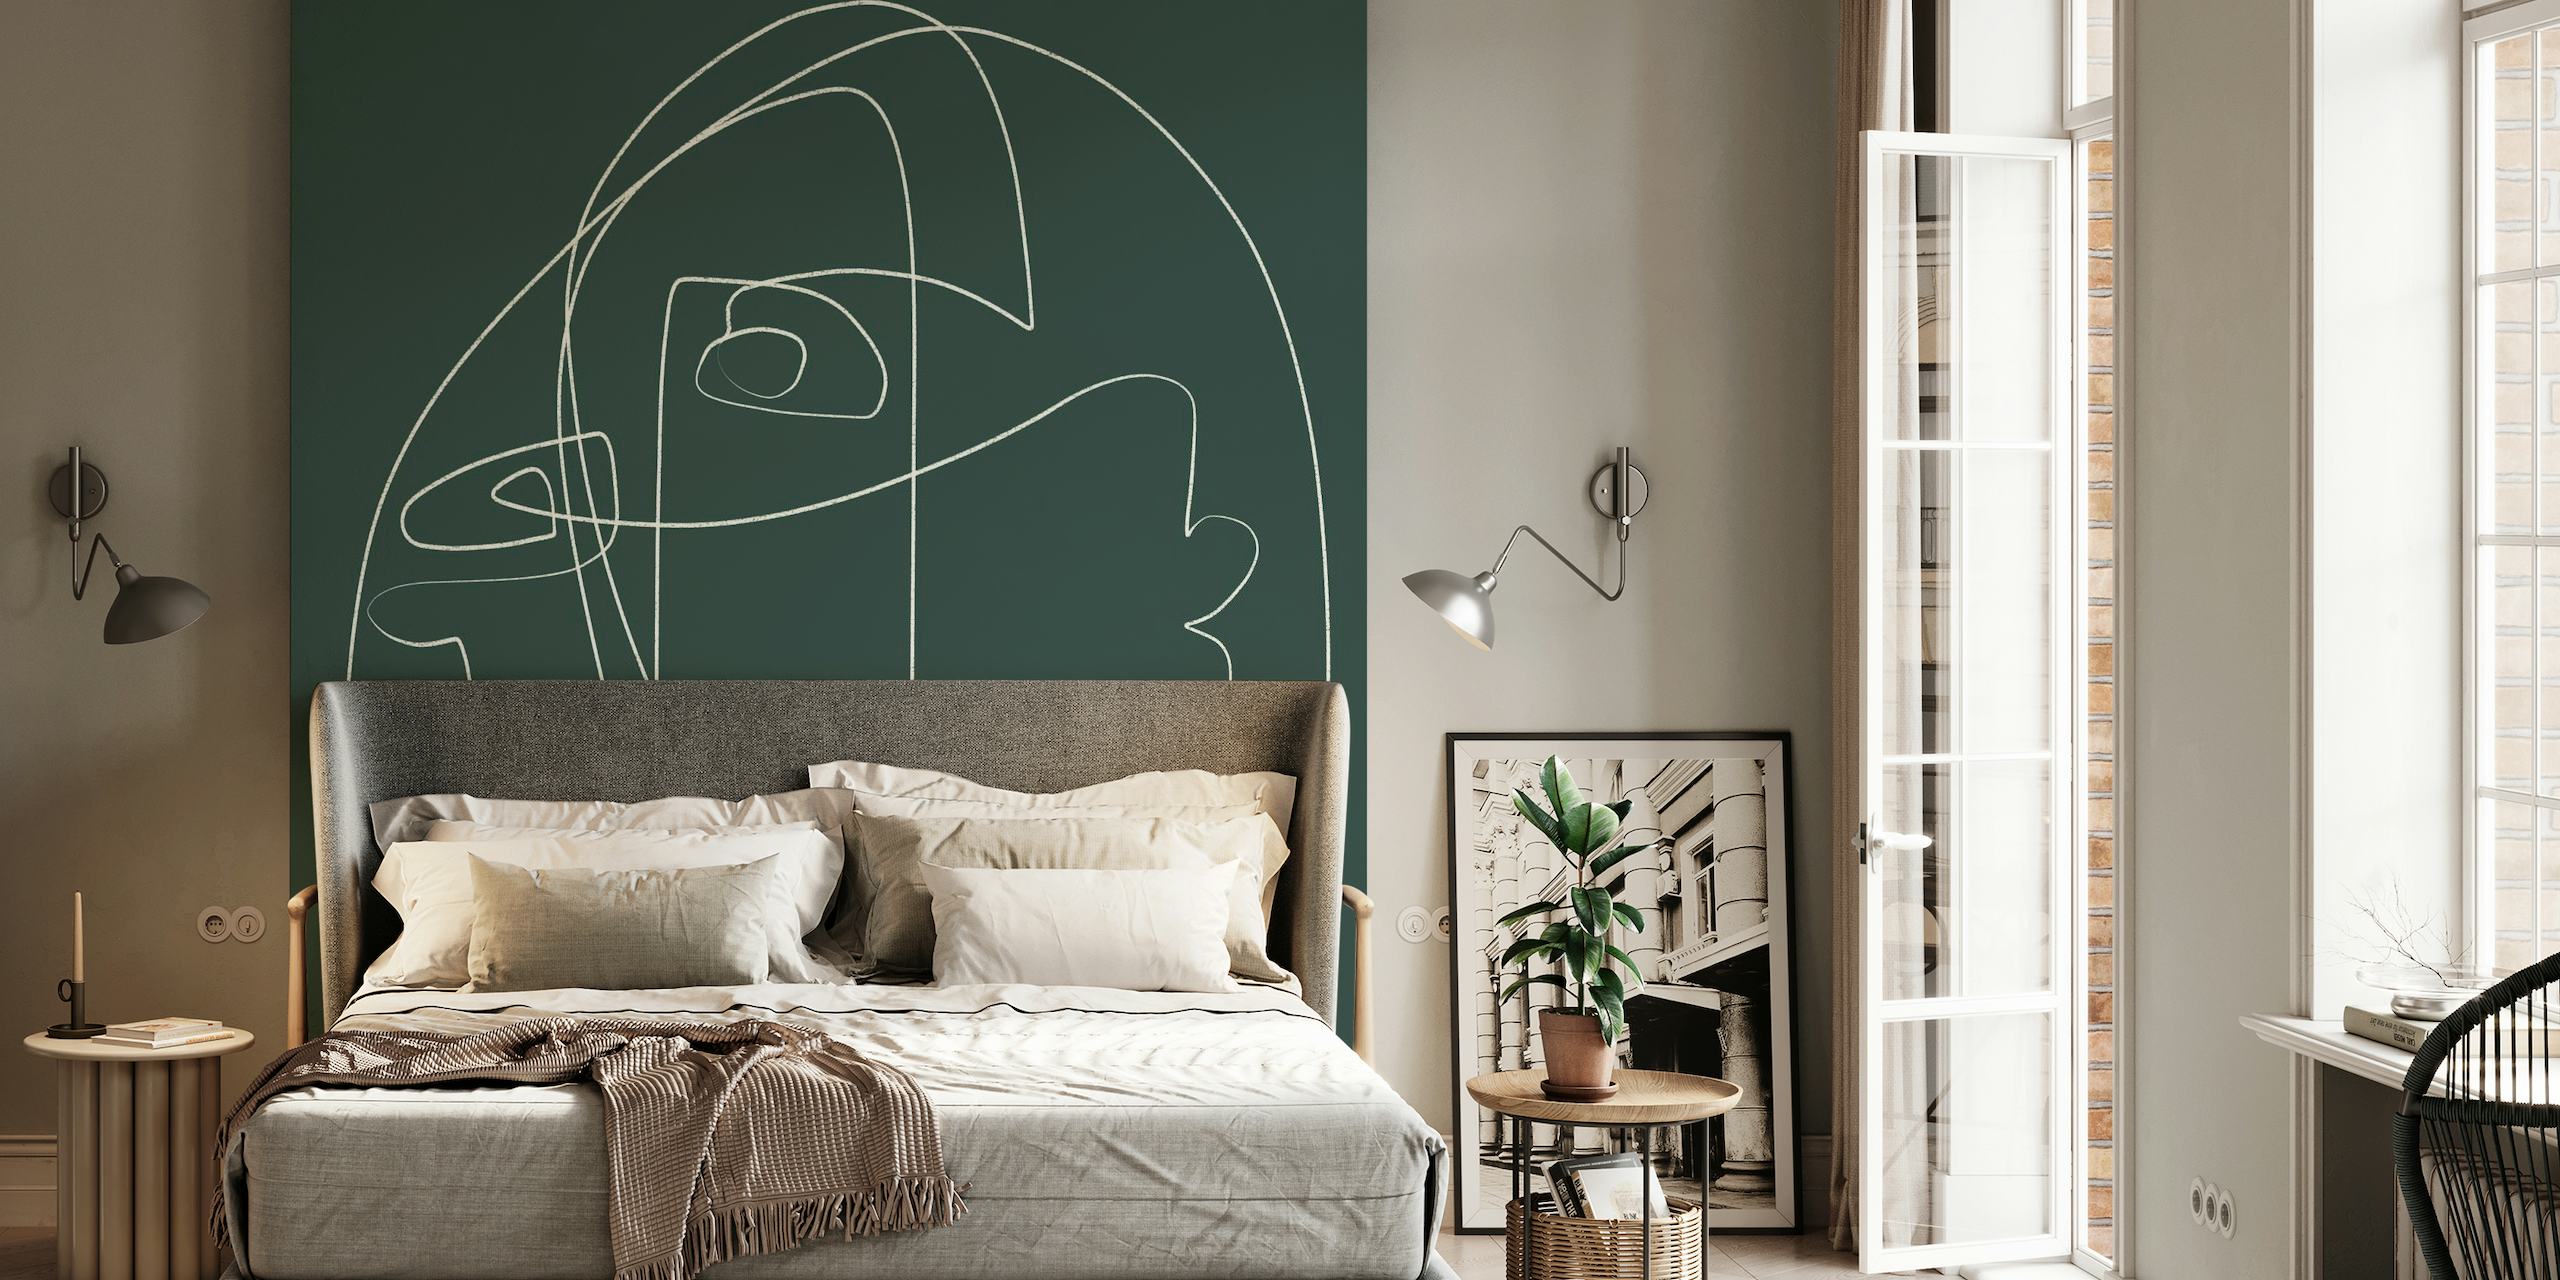 Abstract thin line portrait in white on a viridian background wall mural